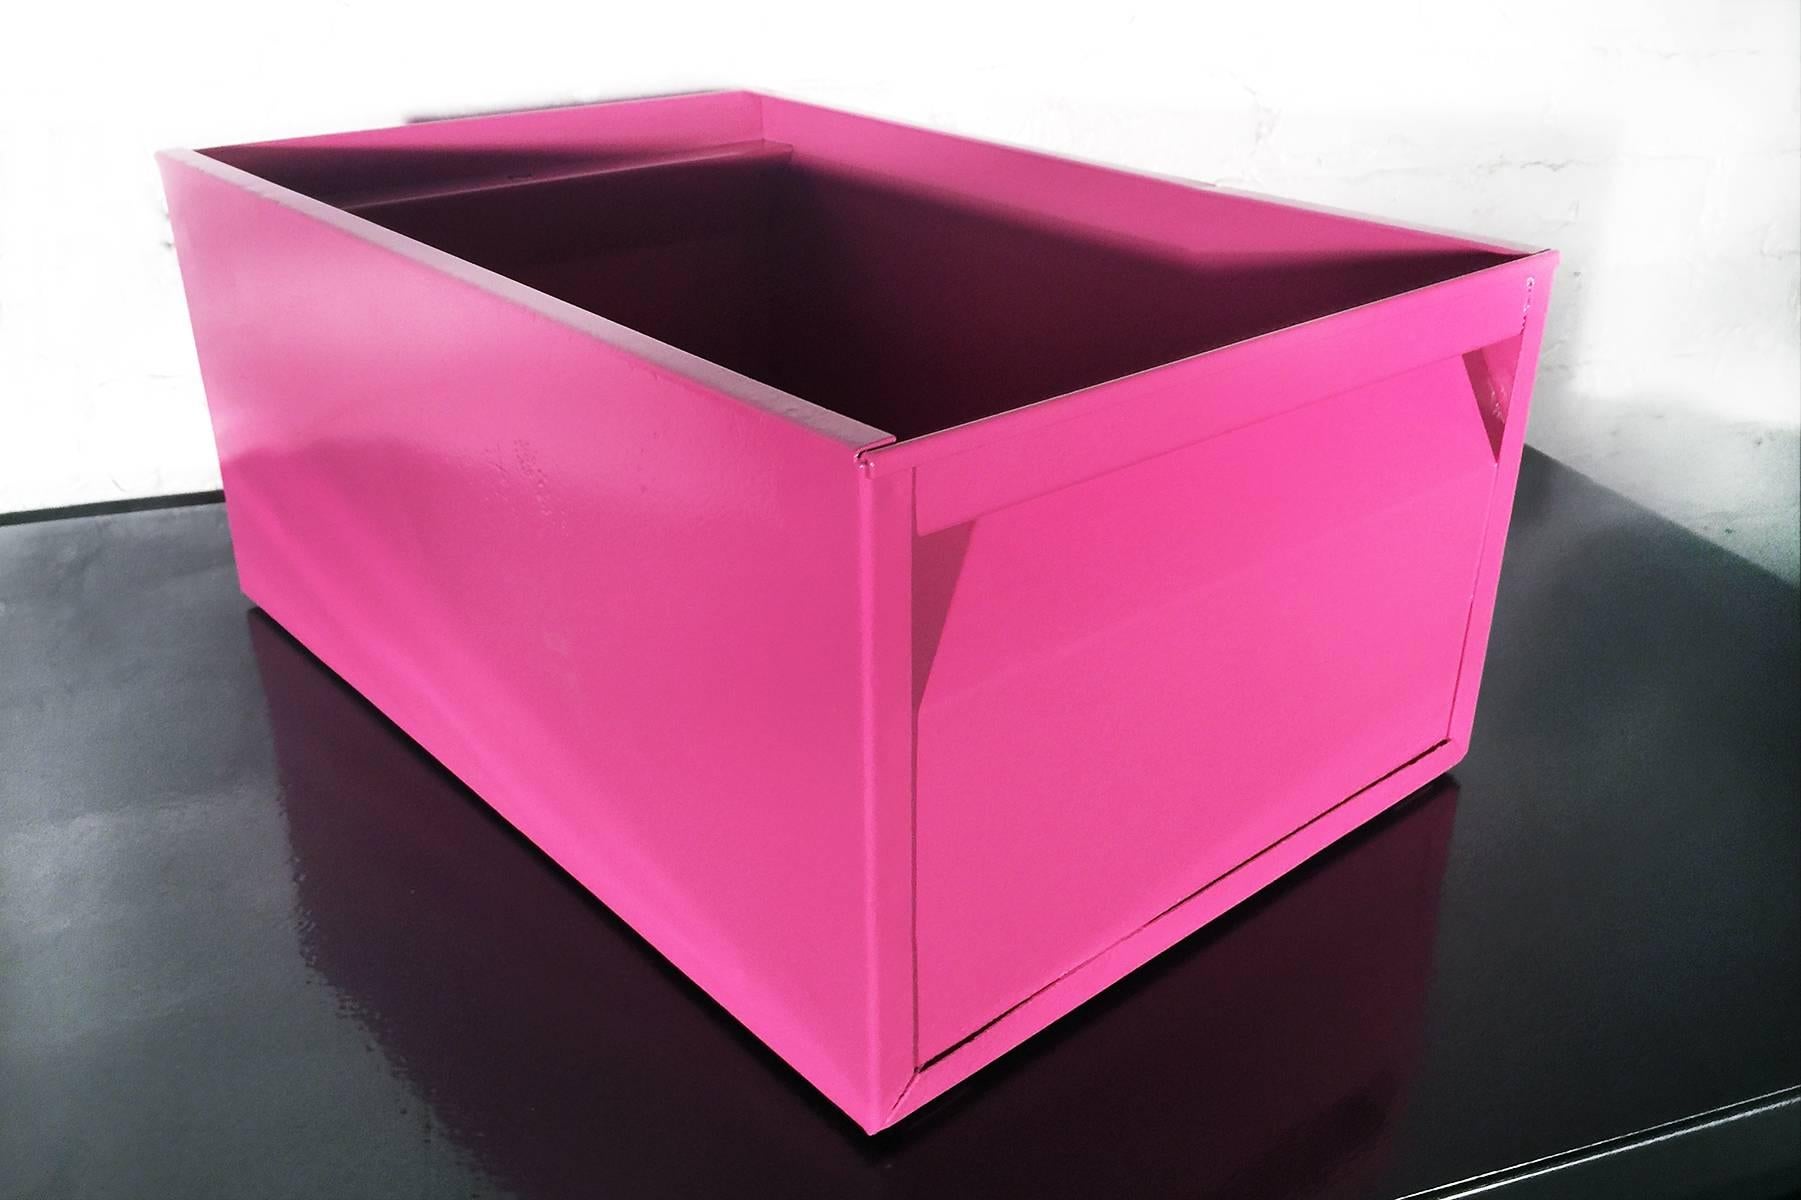 We refinished our fantastic 1940s, industrial storage bin in a gloss pink powder coat. This Classic, heavy-duty steel organizer is sure to keep your office in tip-top shape.